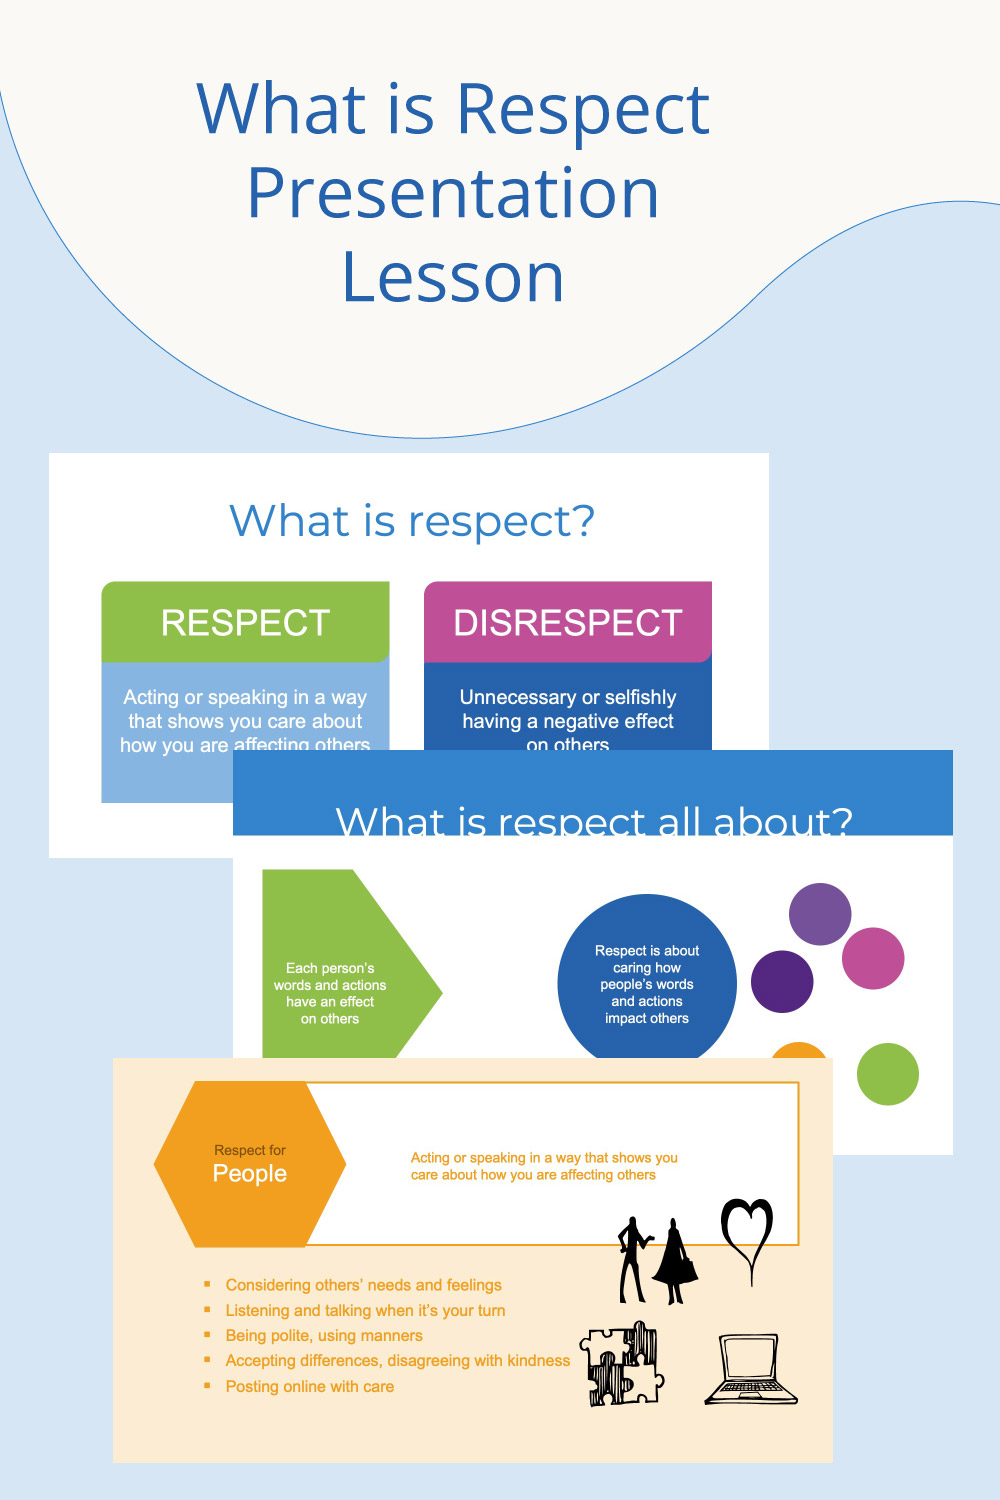 What is respect presentation and lesson for elementary aged children